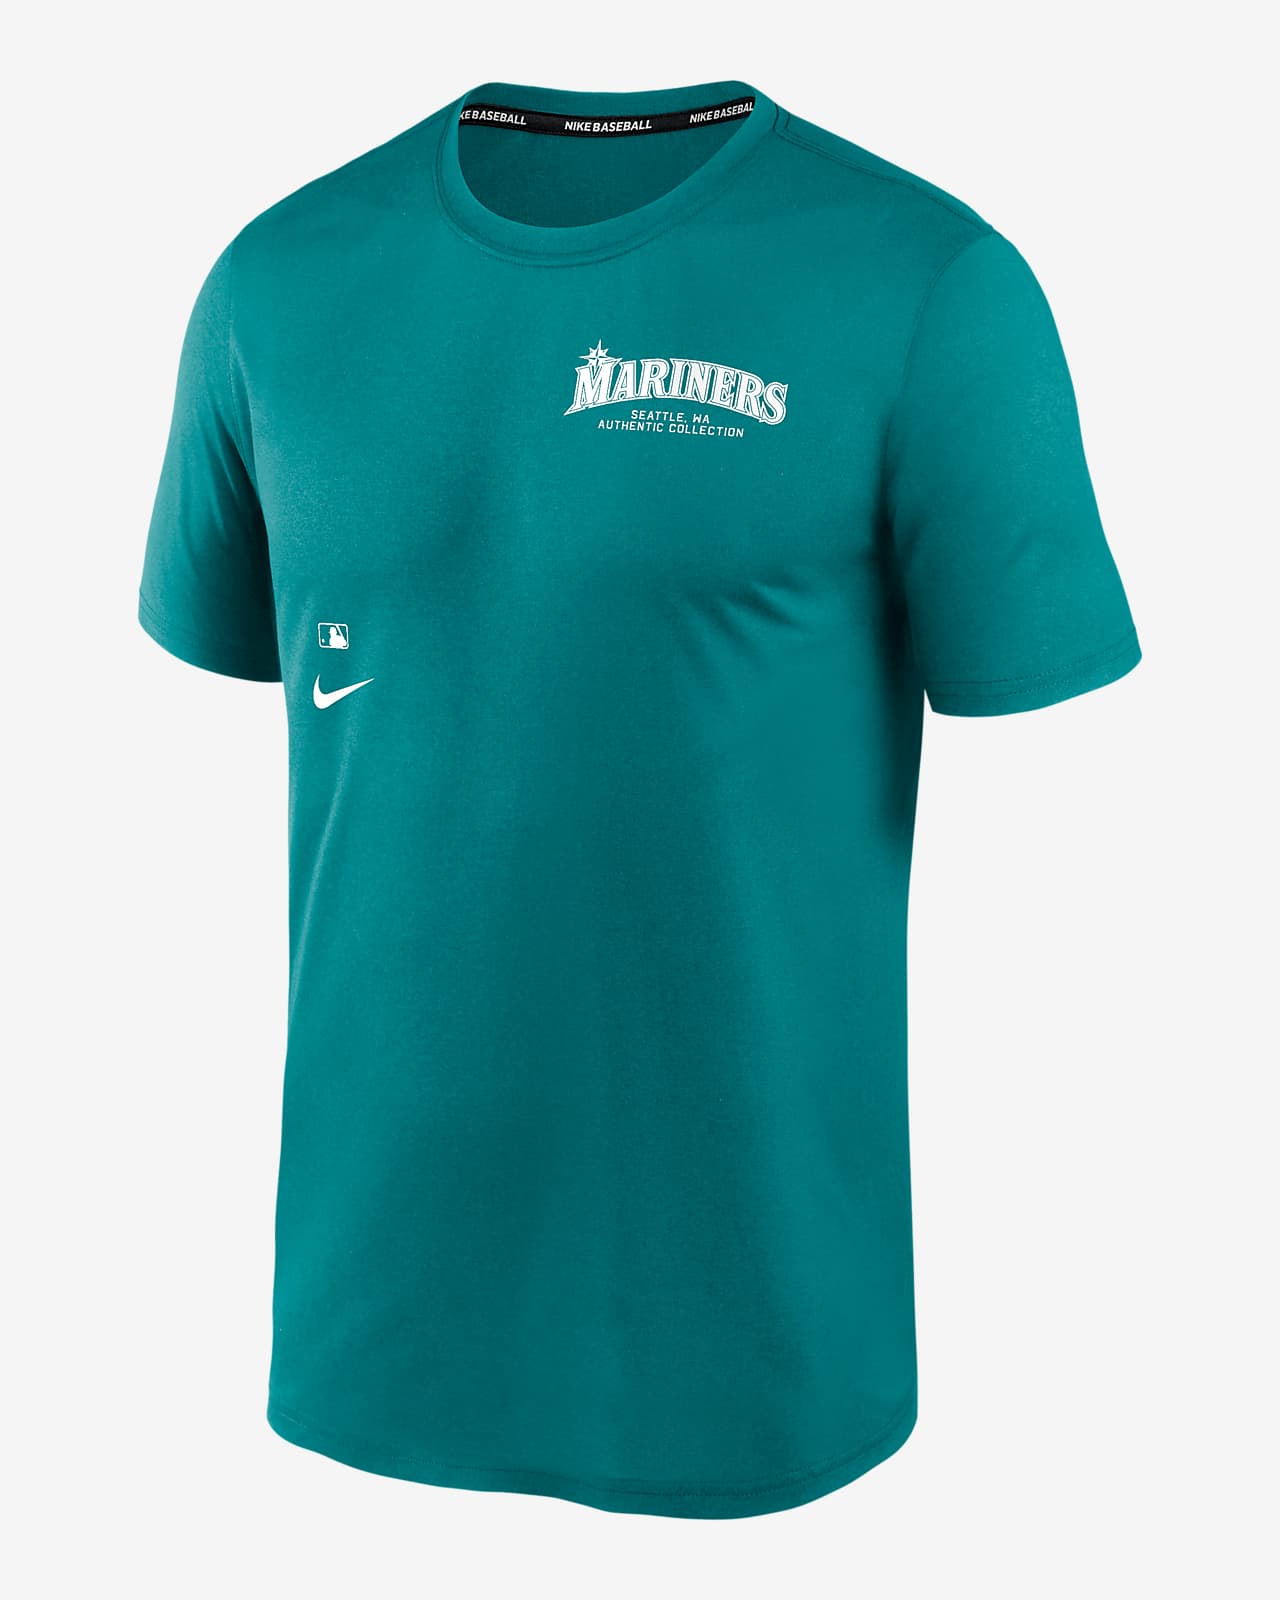 Playera Nike Dri-FIT de la MLB para hombre Seattle Mariners Authentic Collection Early Work